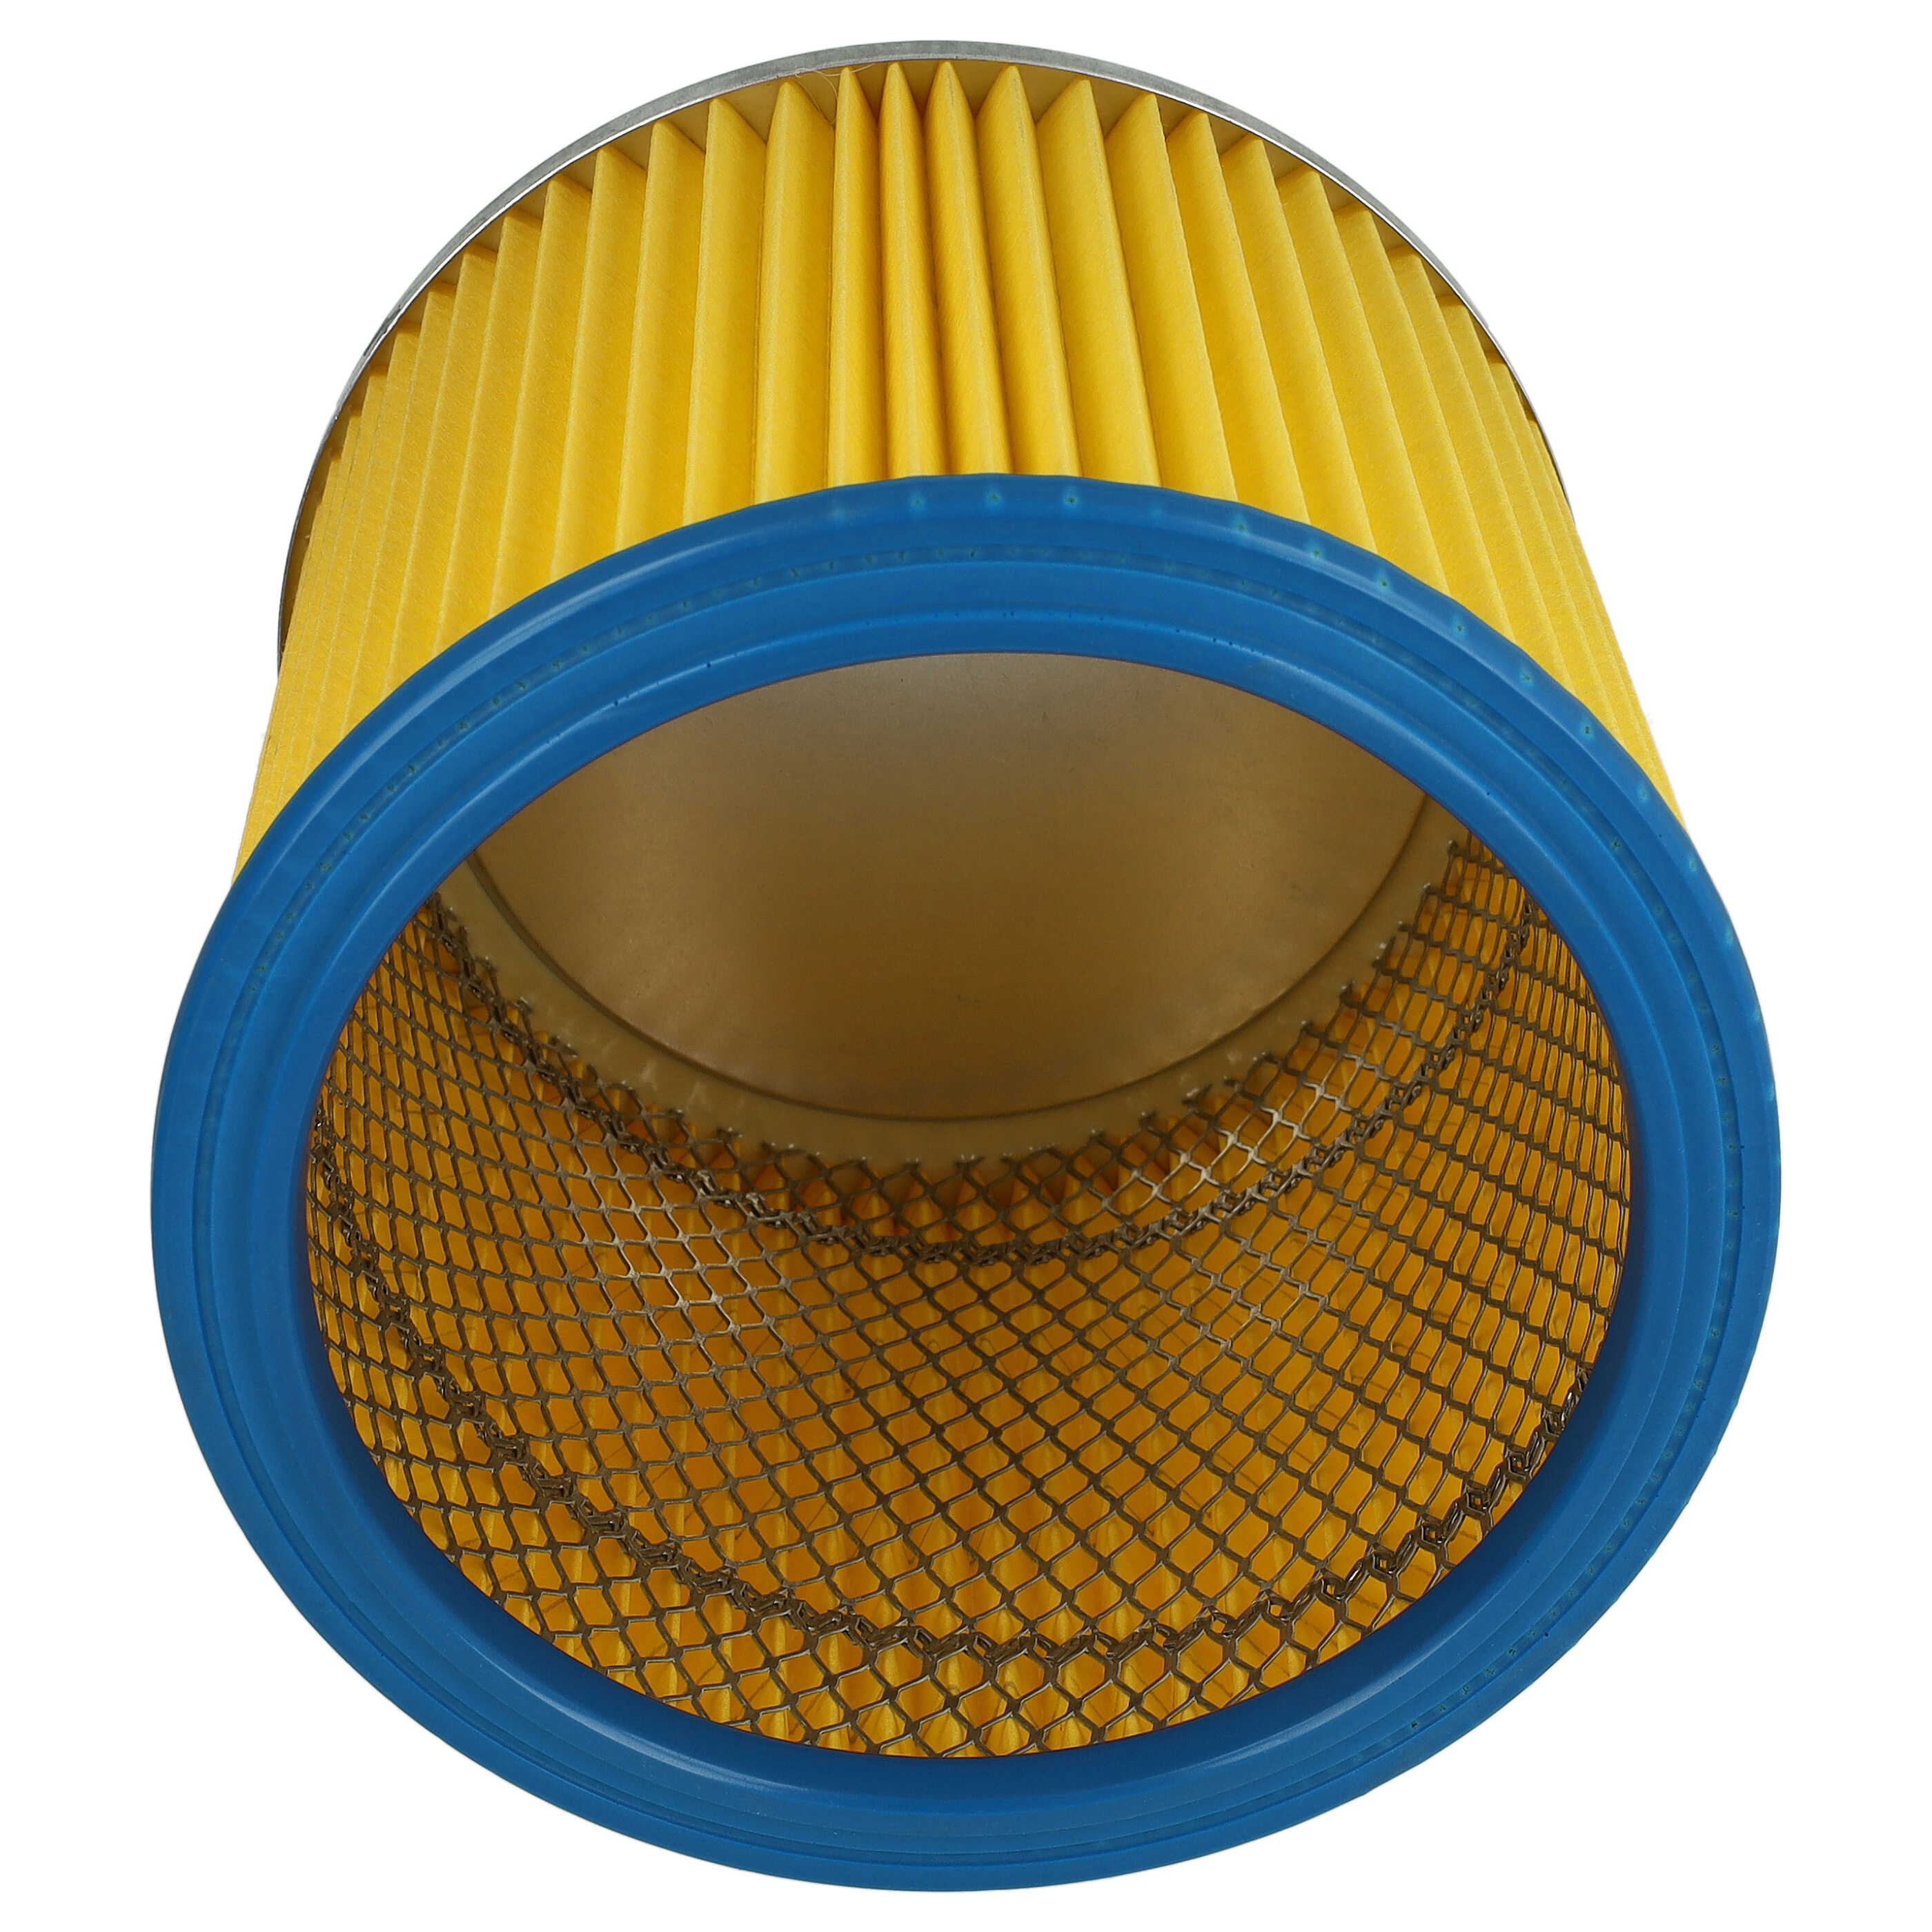 2x filter replaces Einhell 2351110 for GüdeVacuum Cleaner, blue / yellow